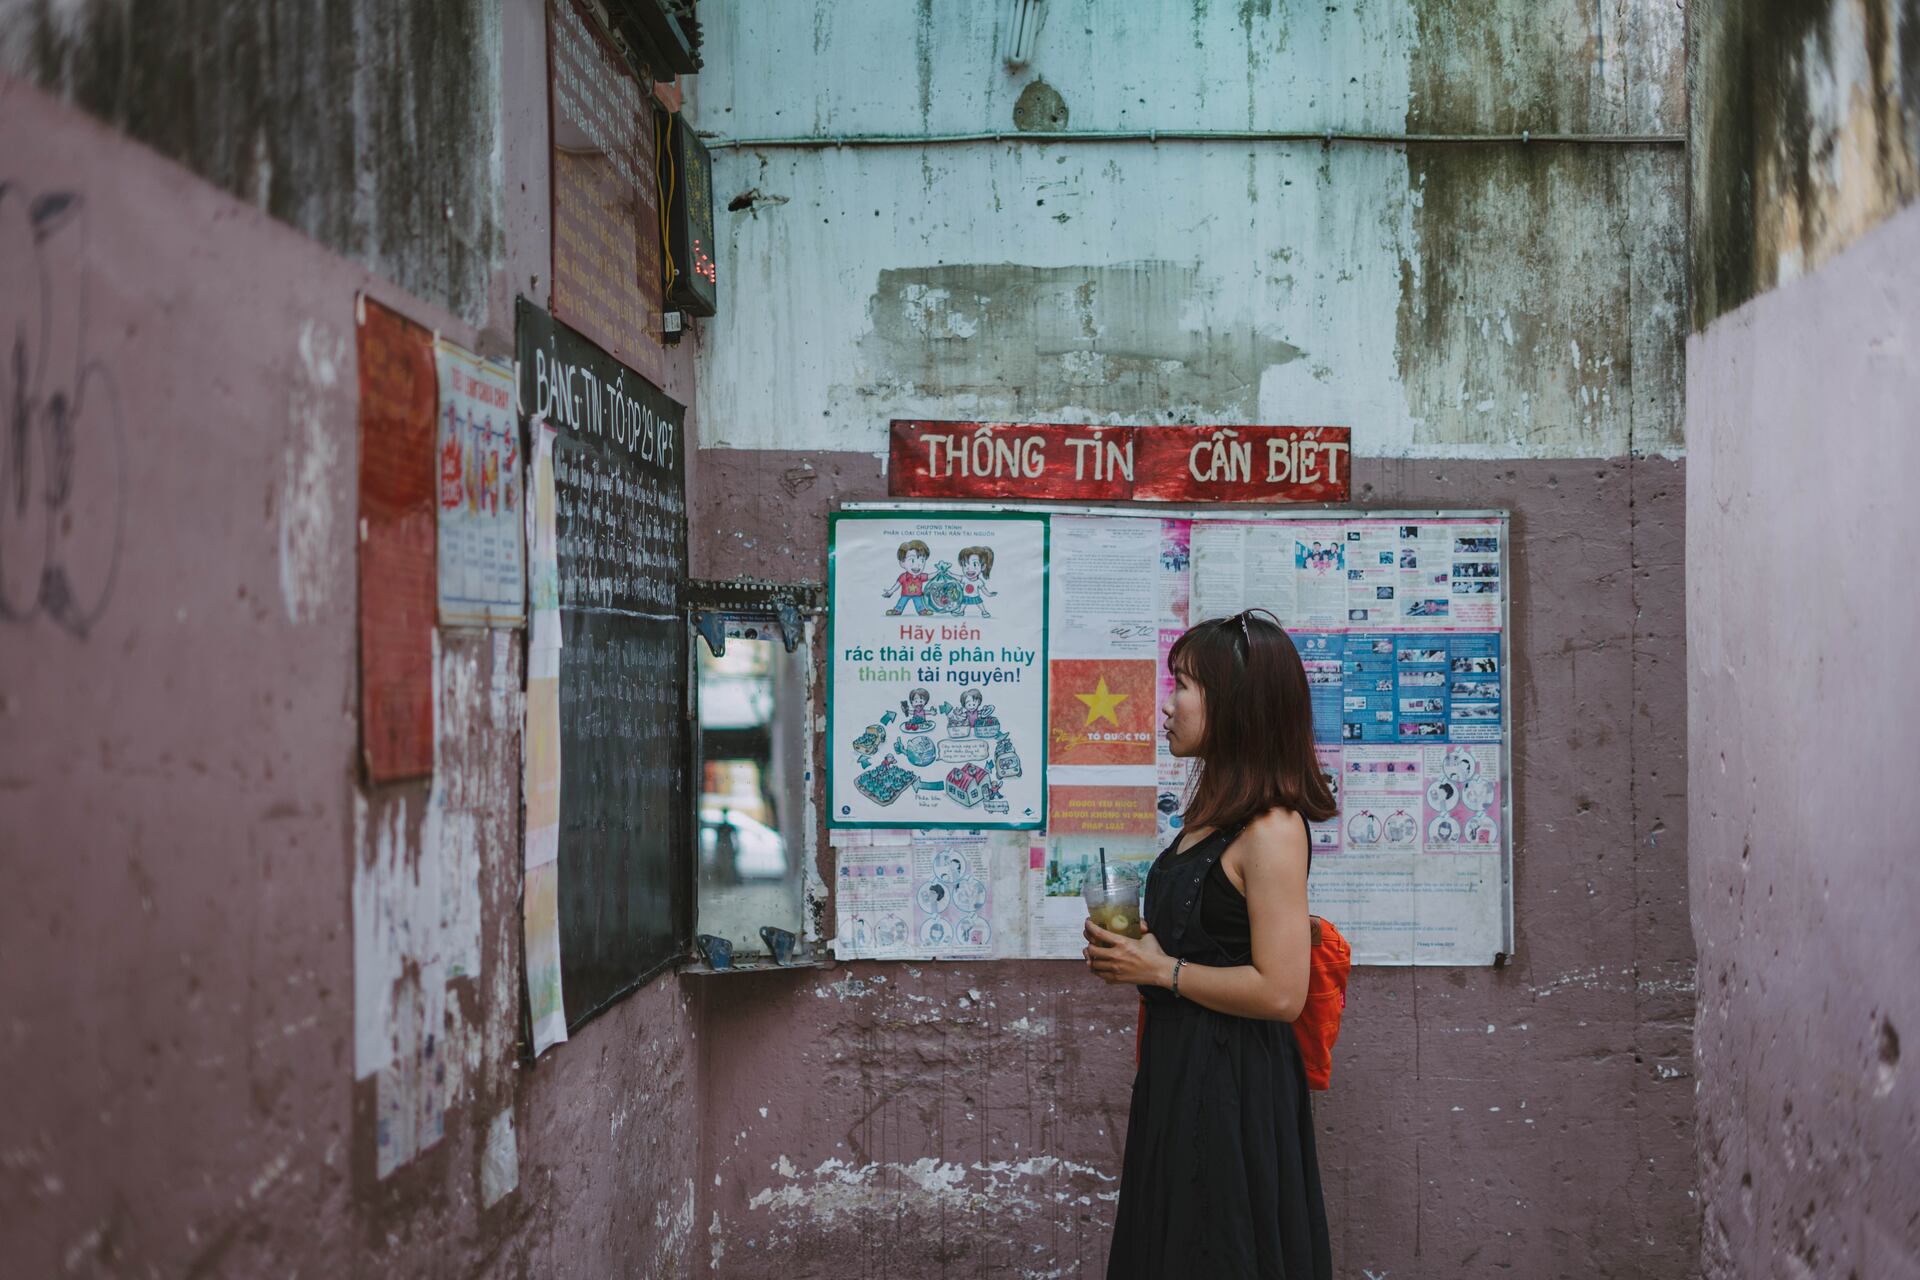 A woman reading street flyers in Thailand